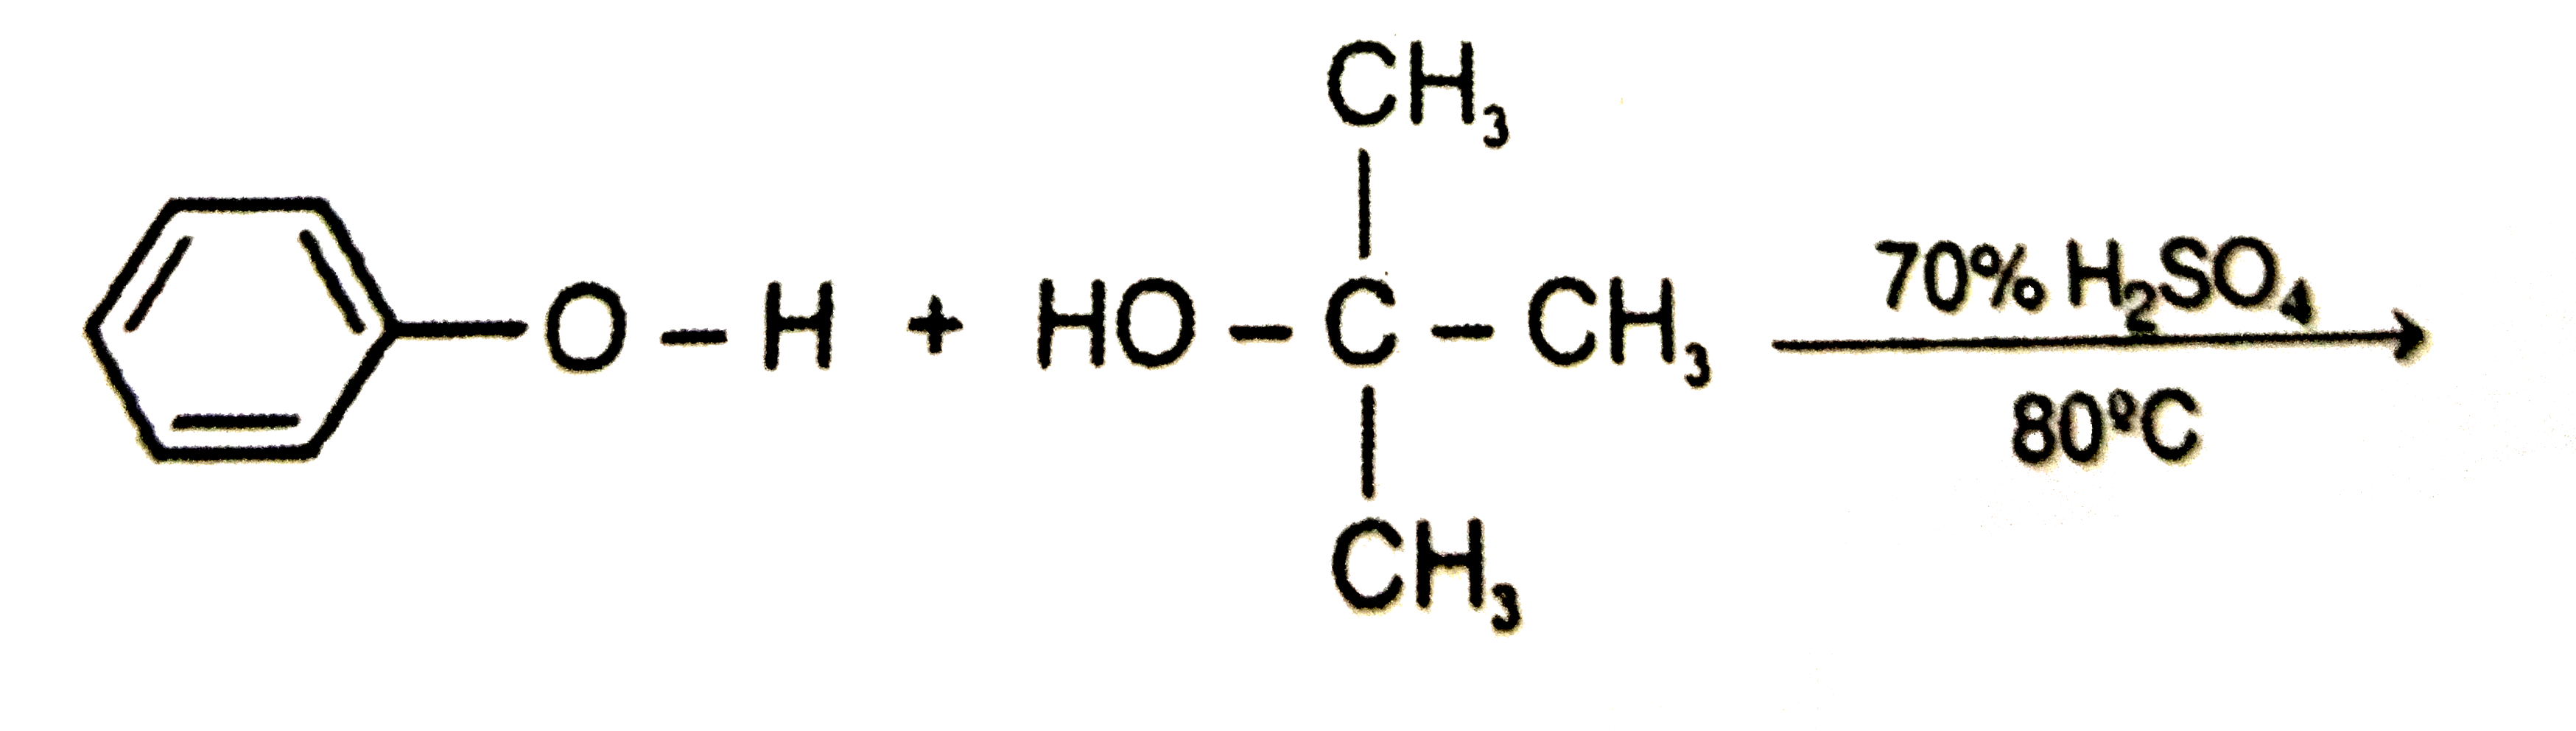 The major product of the following reaction is